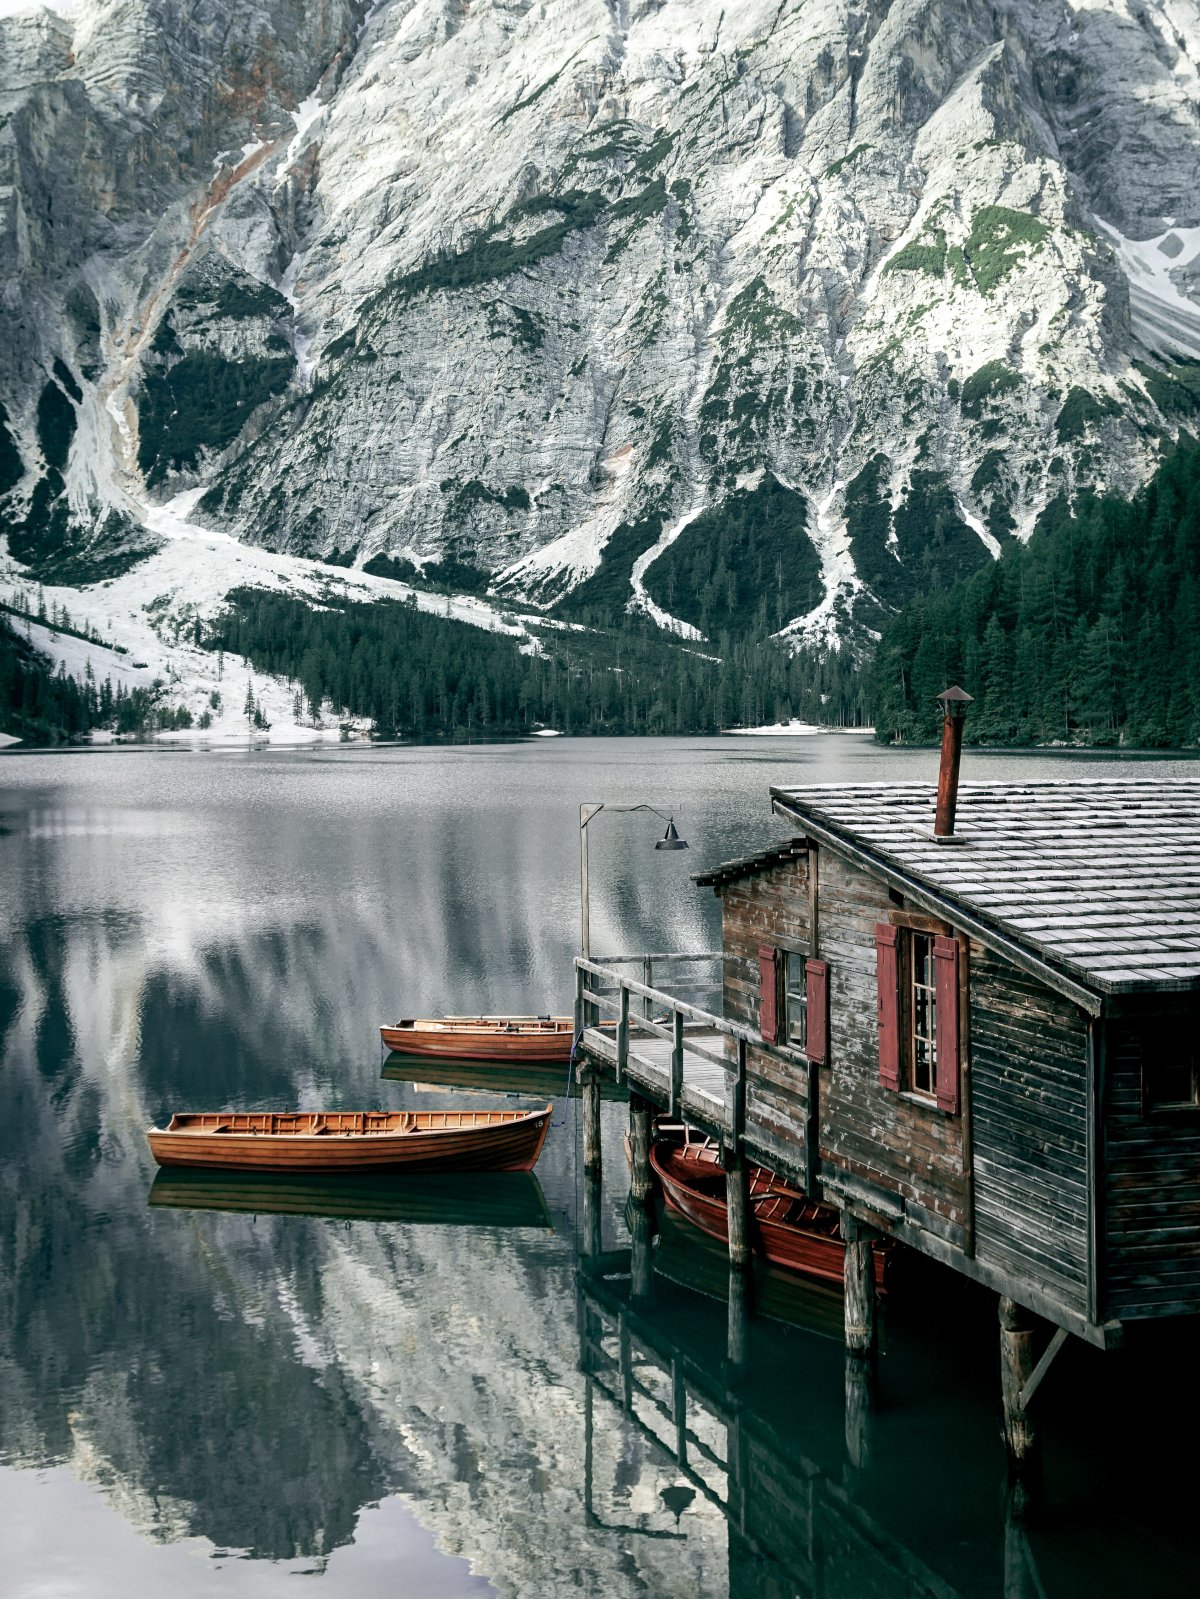 Landscape pictures of lakes and wooden houses